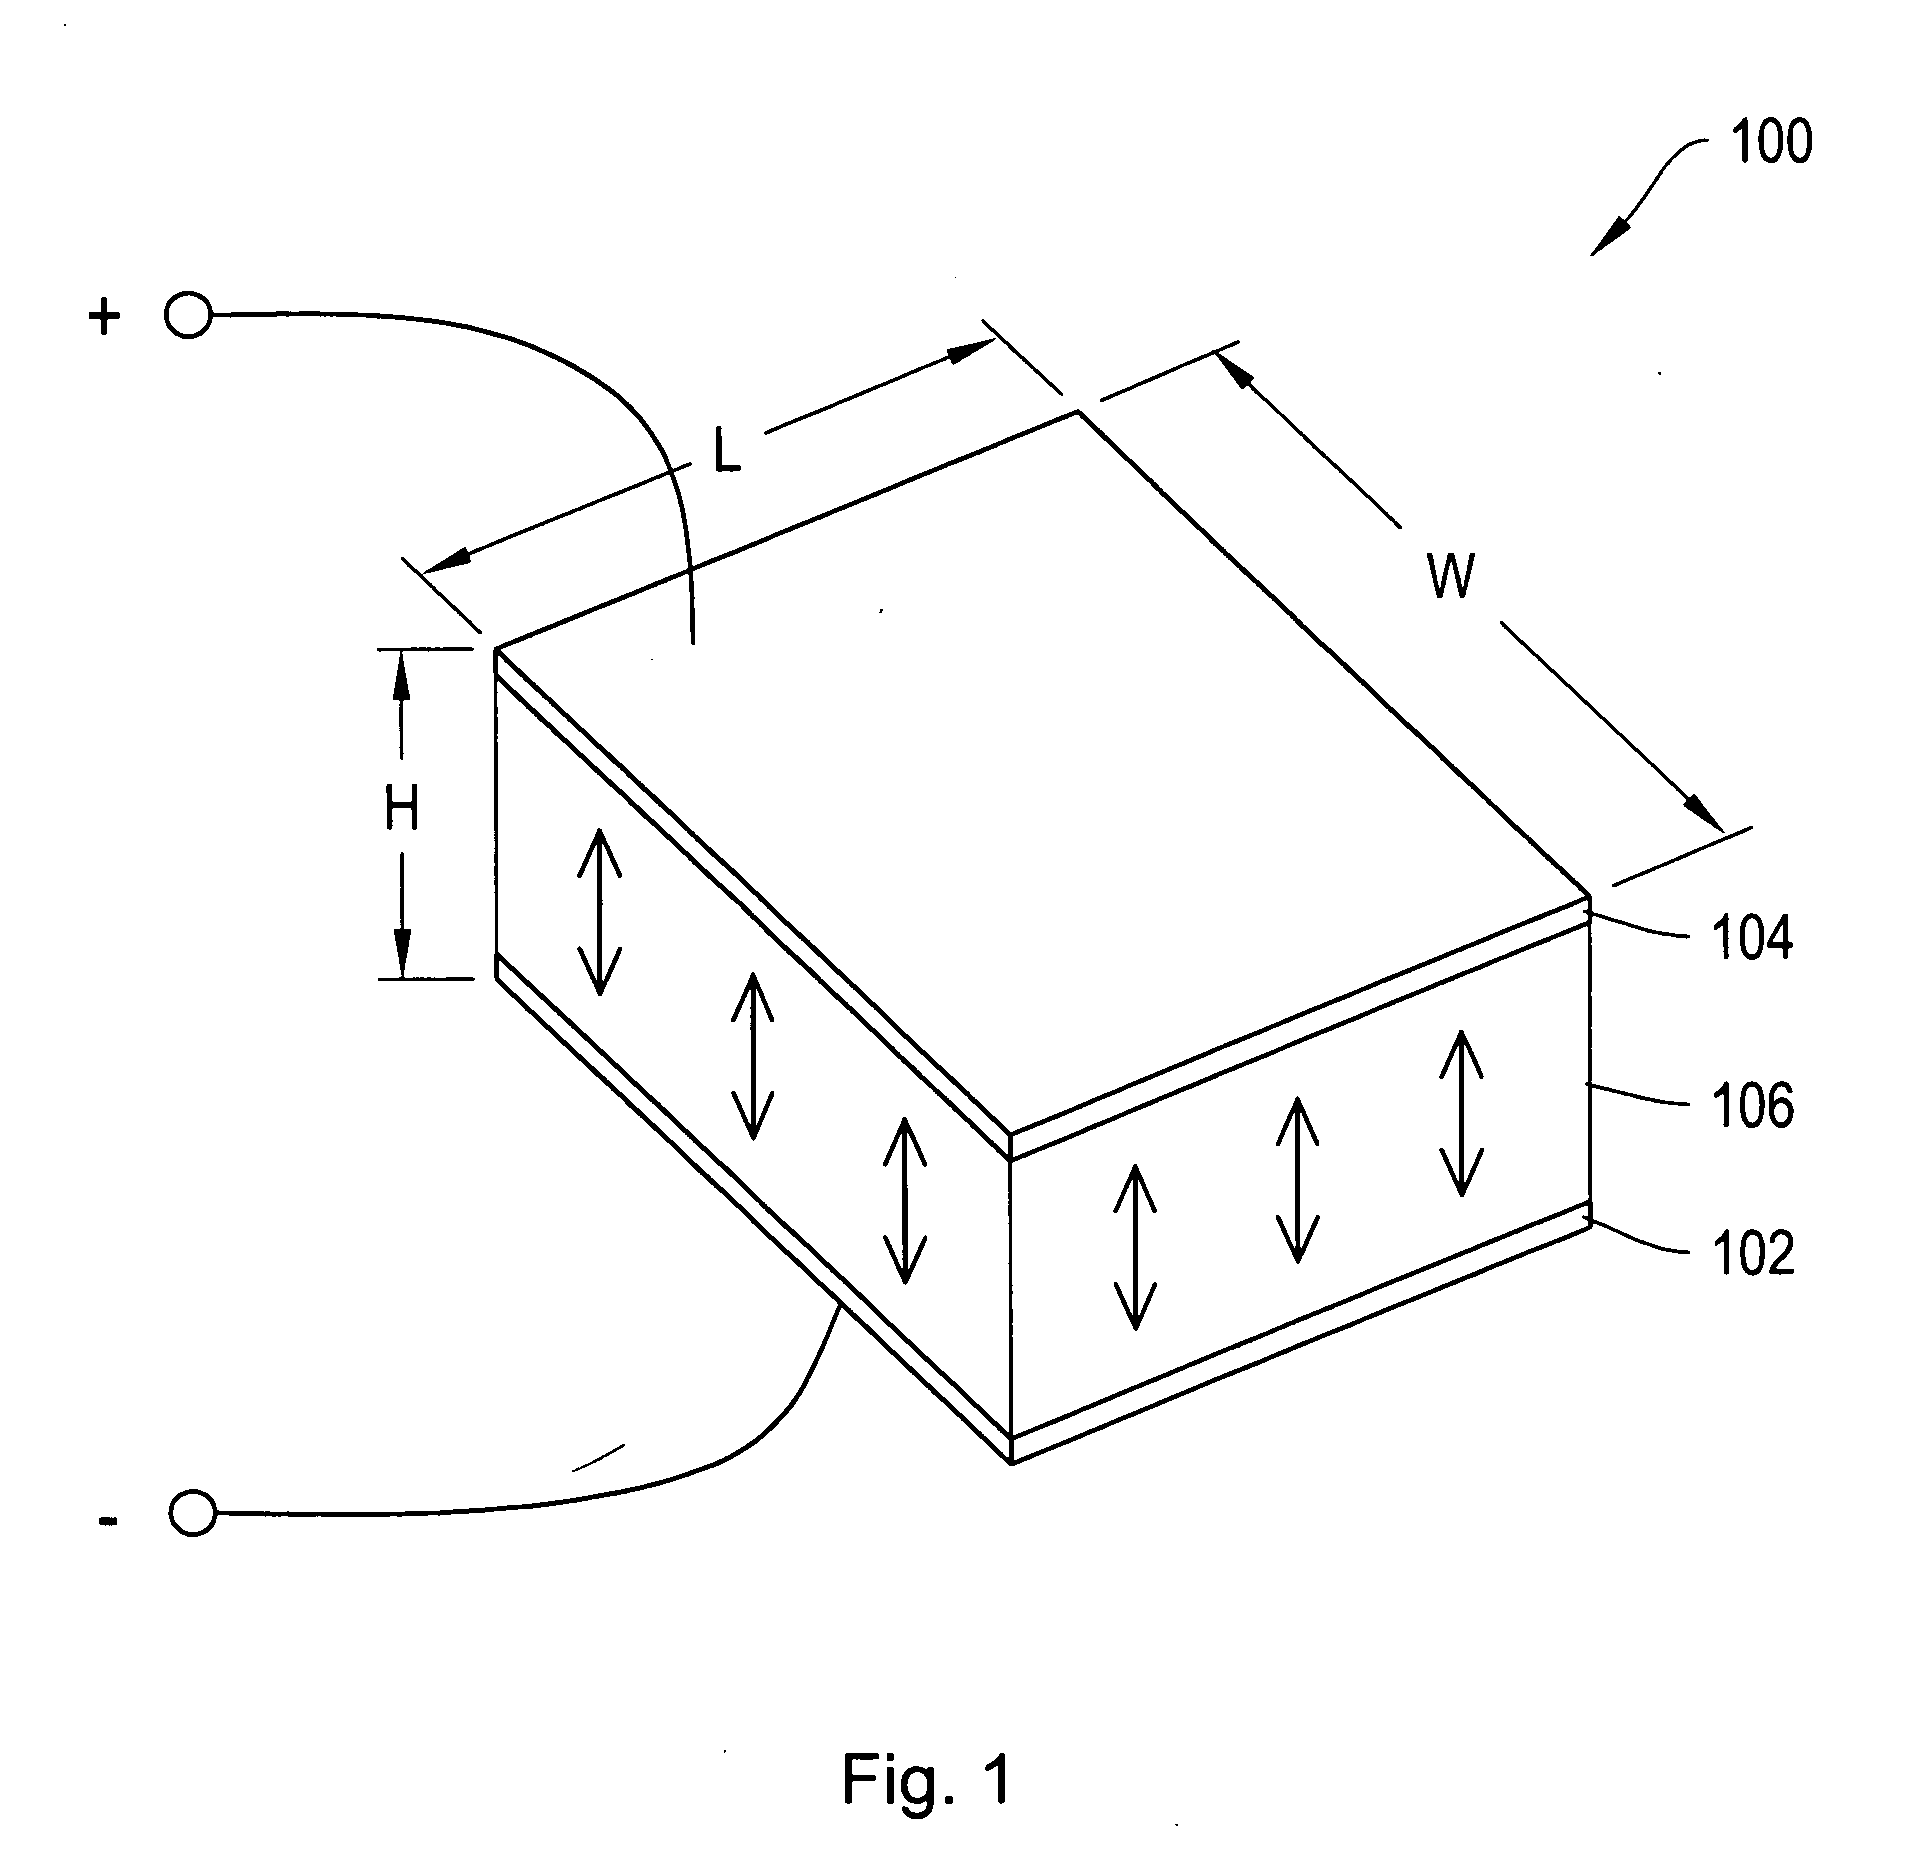 Multi-touch display screen with localized tactile feedback